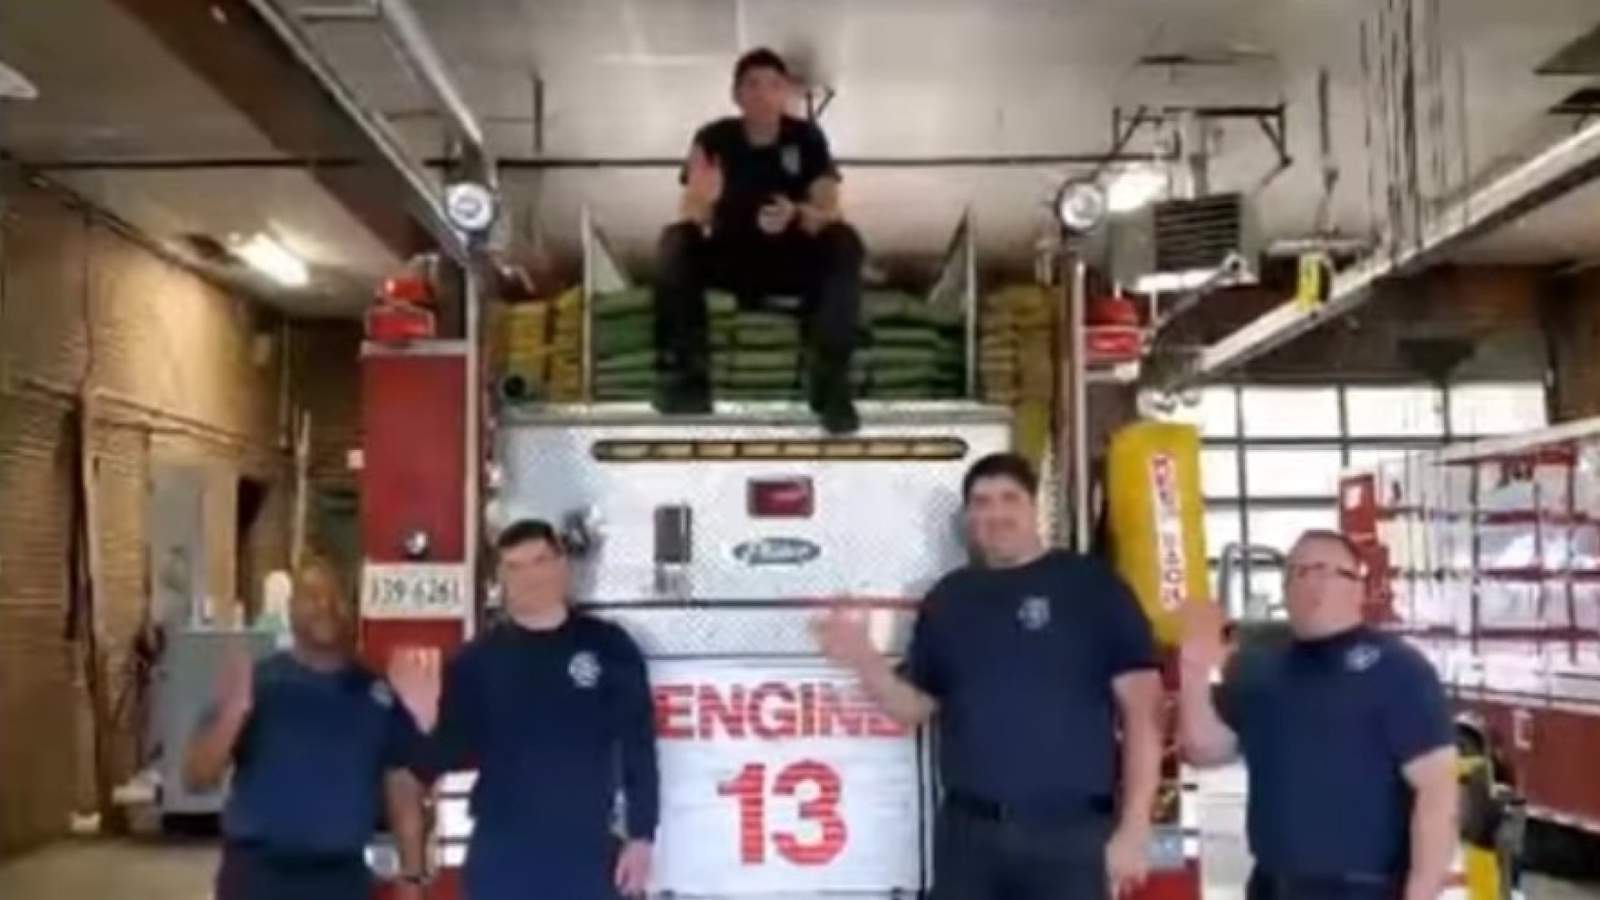 Love firefighters? Roanoke’s are now offering birthday shoutouts